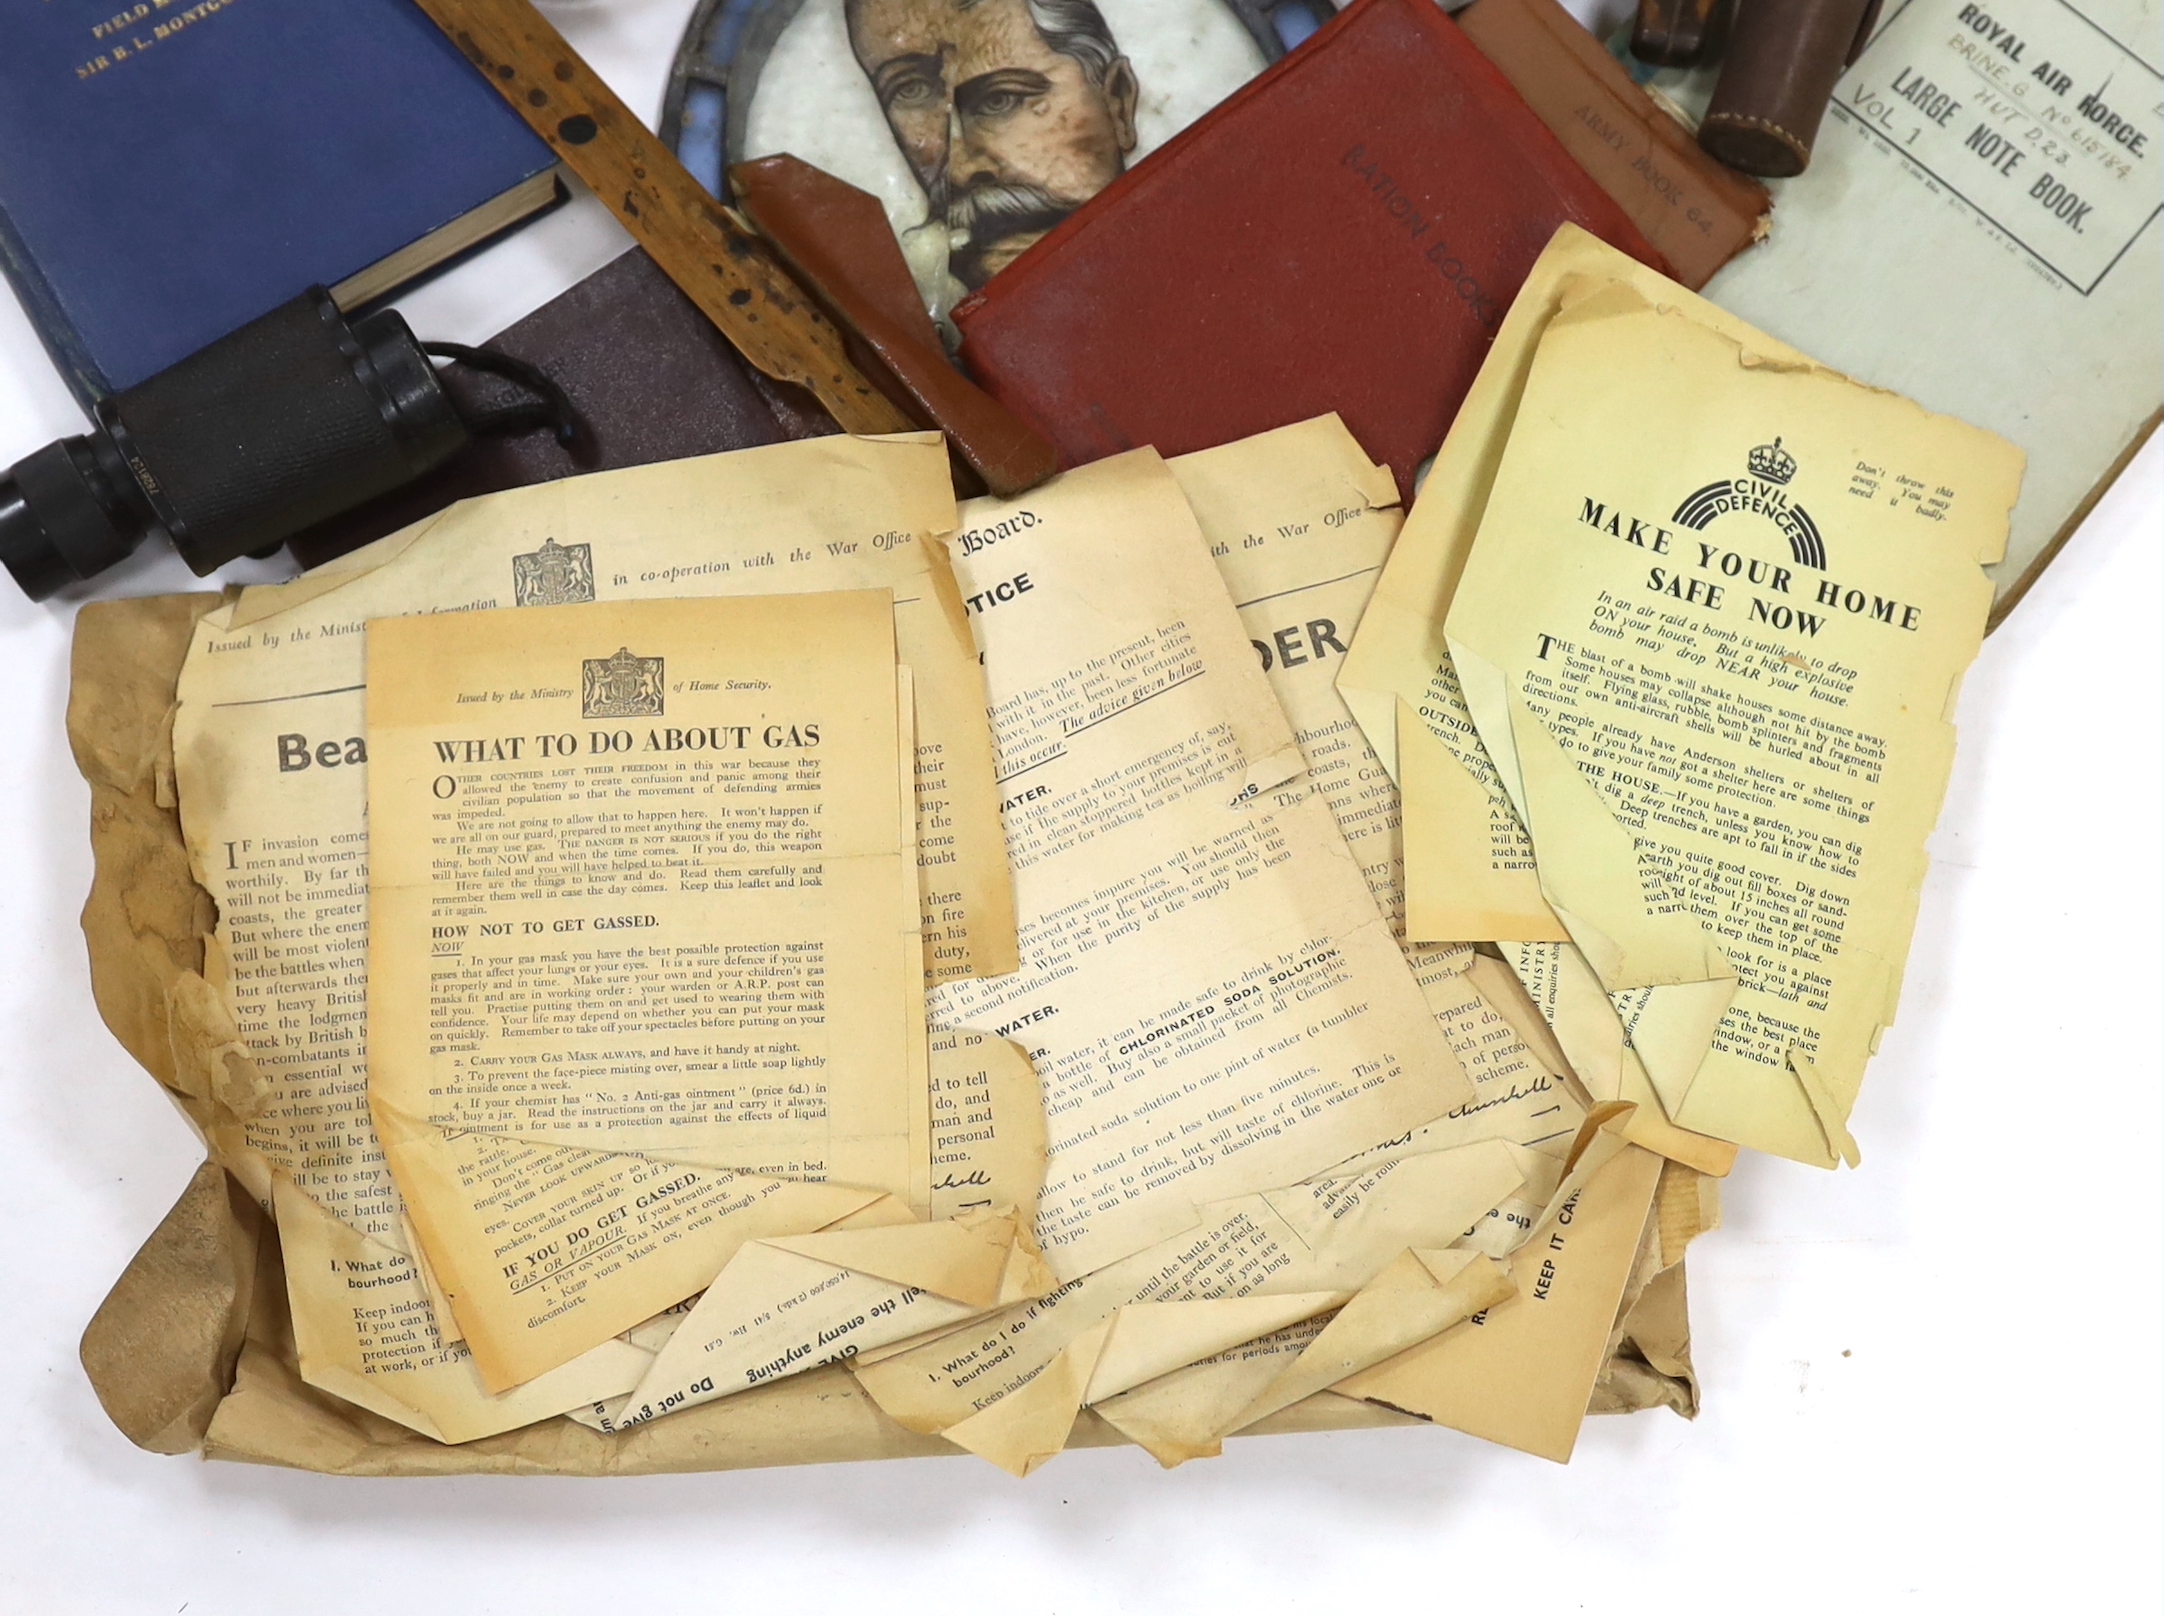 A collection of militaria, including a brass model of a Napoleonic era field gun, a stained glass panel, a Royal Air Force notebook, Civil Defence leaflets, etc.